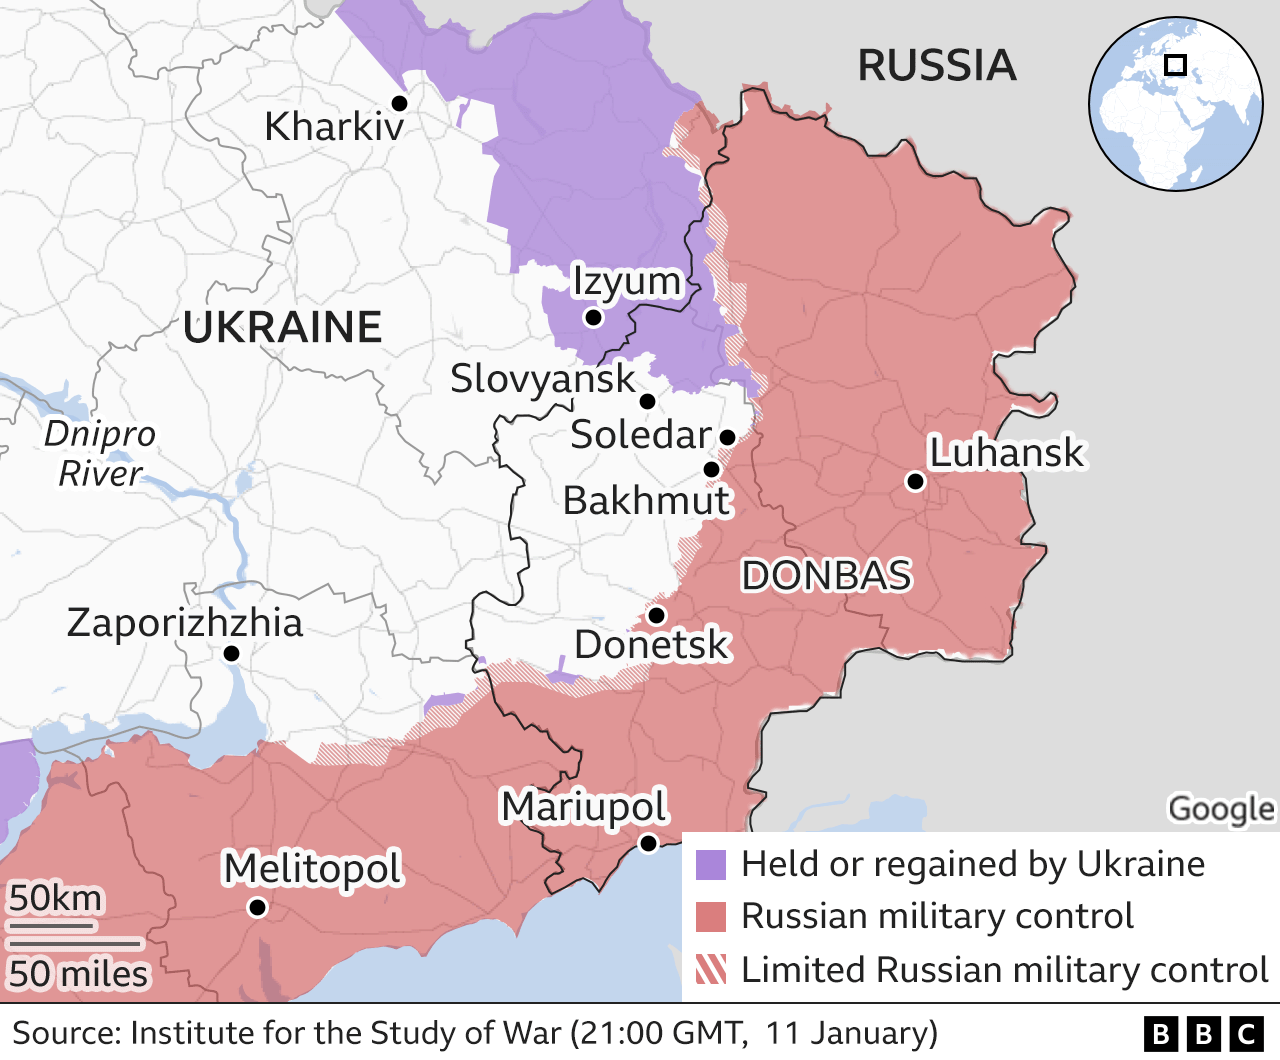 Map shows the Donbas region and the areas of Bakhmut and Soledar, where intense fighting continues